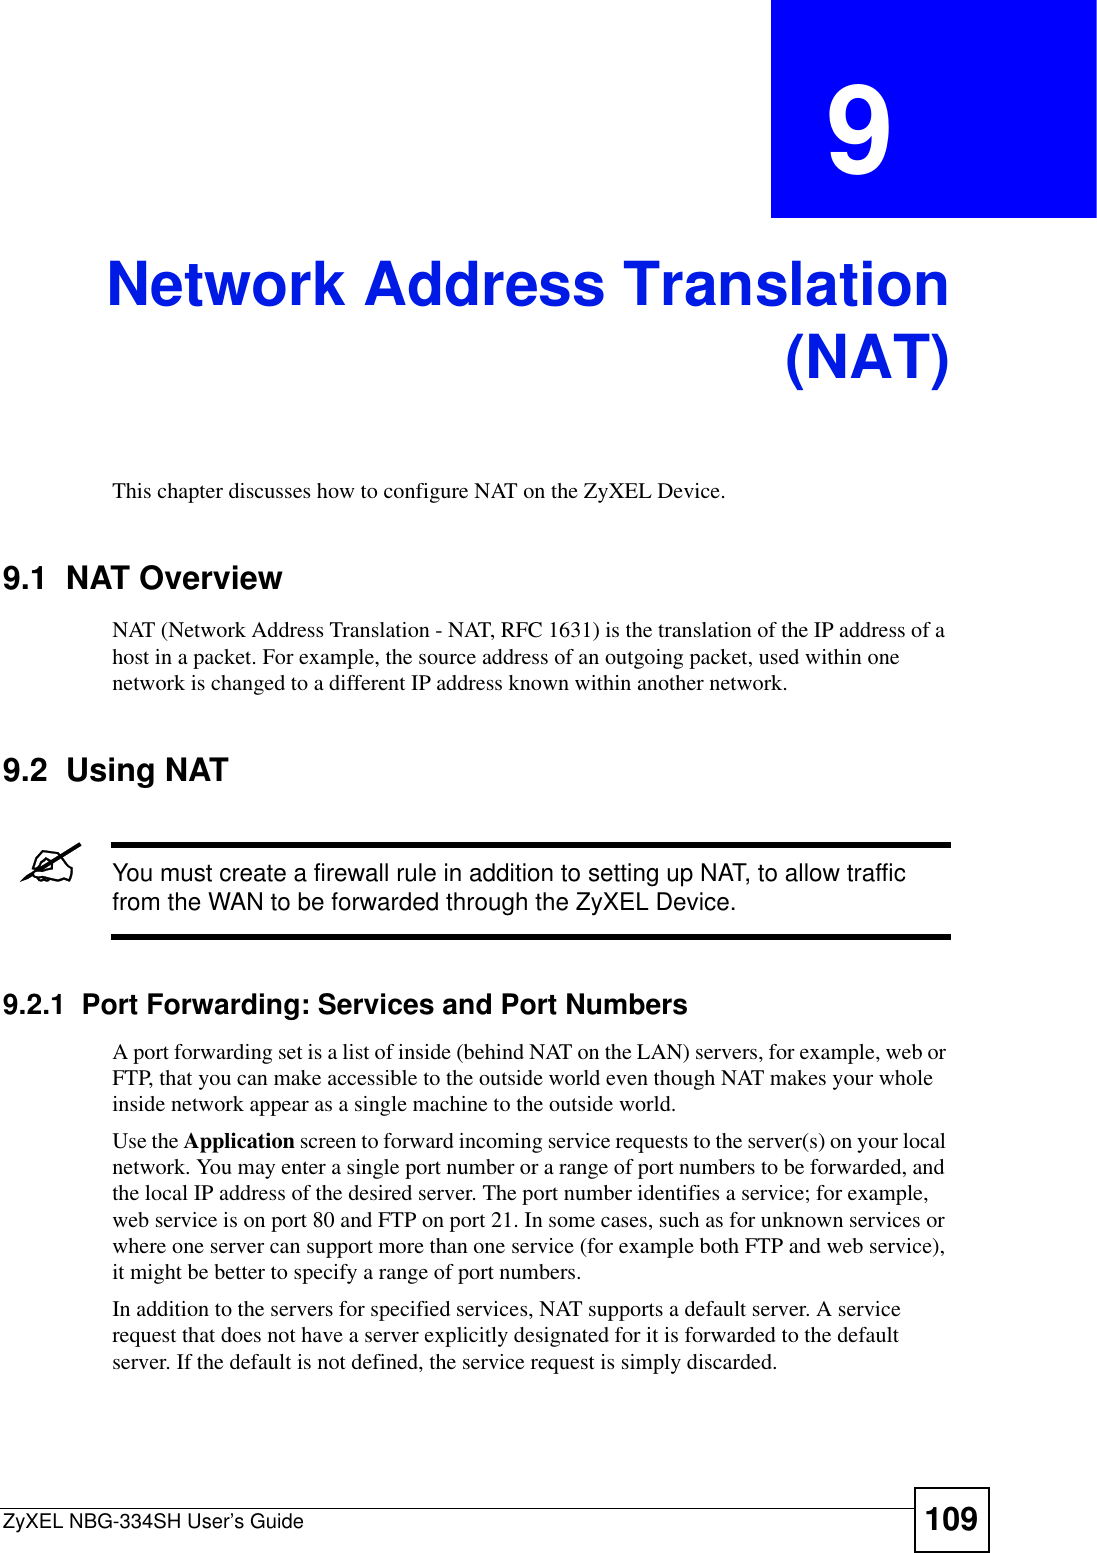 ZyXEL NBG-334SH User’s Guide 109CHAPTER  9 Network Address Translation(NAT)This chapter discusses how to configure NAT on the ZyXEL Device.9.1  NAT Overview   NAT (Network Address Translation - NAT, RFC 1631) is the translation of the IP address of a host in a packet. For example, the source address of an outgoing packet, used within one network is changed to a different IP address known within another network.9.2  Using NAT&quot;You must create a firewall rule in addition to setting up NAT, to allow traffic from the WAN to be forwarded through the ZyXEL Device.9.2.1  Port Forwarding: Services and Port NumbersA port forwarding set is a list of inside (behind NAT on the LAN) servers, for example, web or FTP, that you can make accessible to the outside world even though NAT makes your whole inside network appear as a single machine to the outside world. Use the Application screen to forward incoming service requests to the server(s) on your local network. You may enter a single port number or a range of port numbers to be forwarded, and the local IP address of the desired server. The port number identifies a service; for example, web service is on port 80 and FTP on port 21. In some cases, such as for unknown services or where one server can support more than one service (for example both FTP and web service), it might be better to specify a range of port numbers.In addition to the servers for specified services, NAT supports a default server. A service request that does not have a server explicitly designated for it is forwarded to the default server. If the default is not defined, the service request is simply discarded.